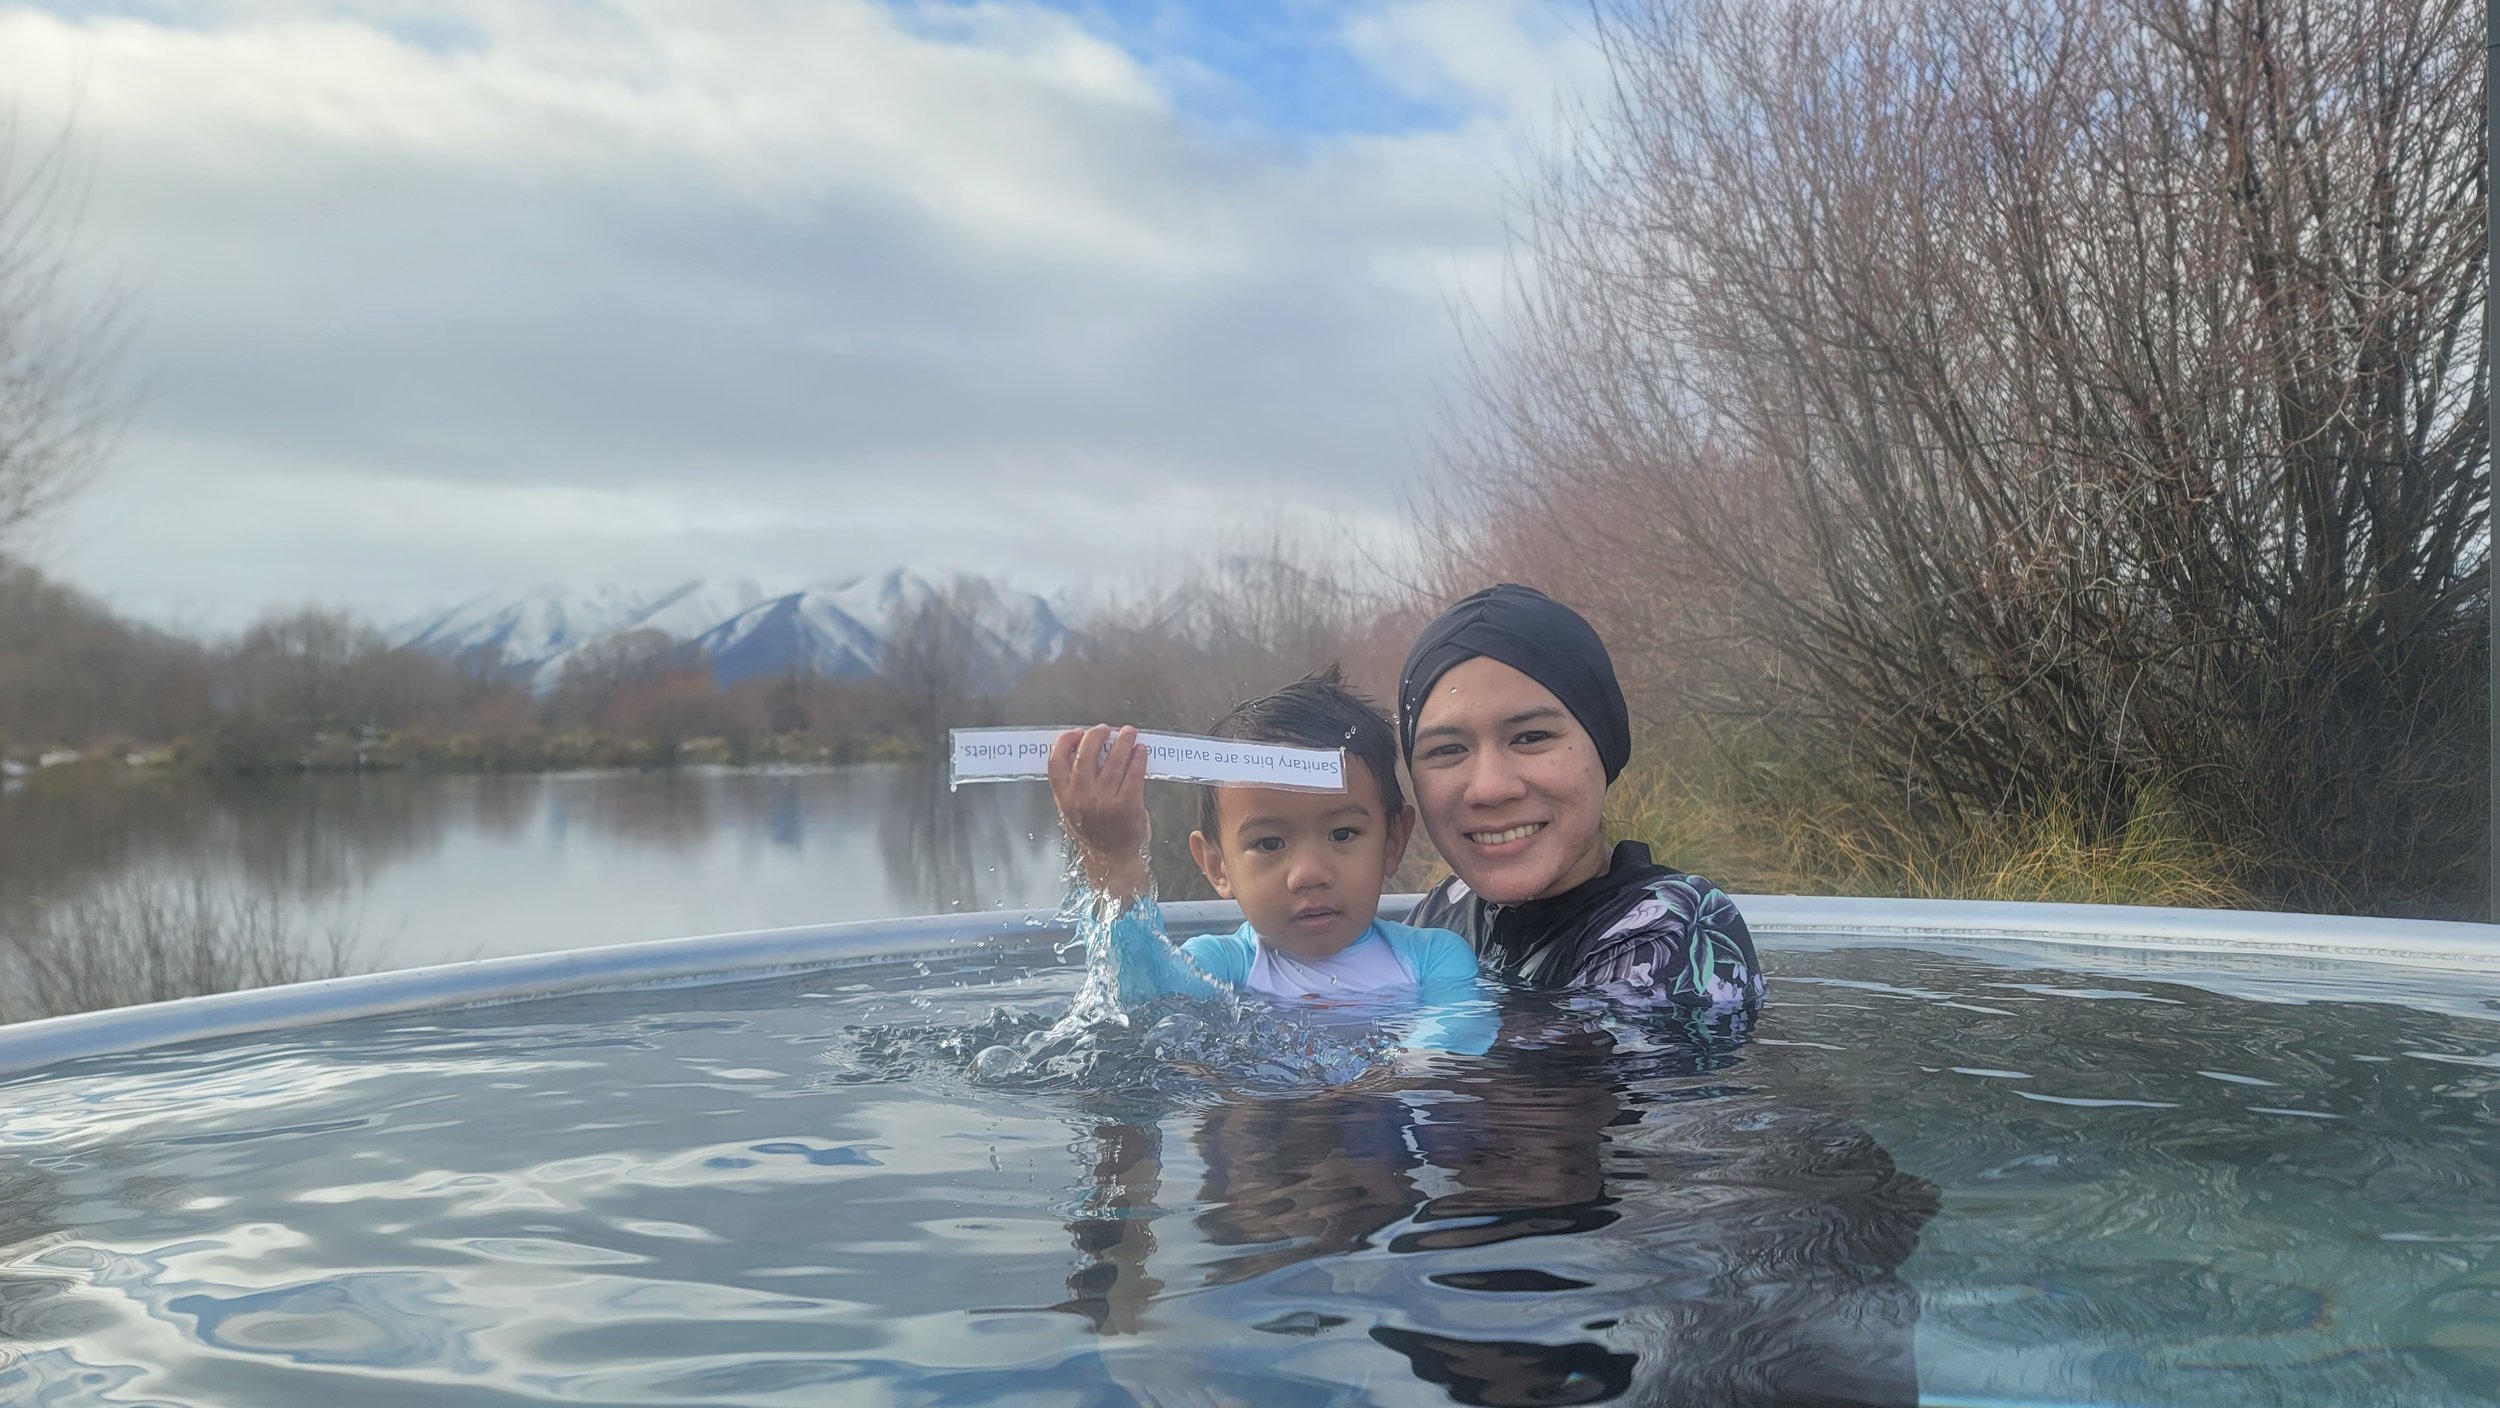  This experience - a hot tub in the snow - was so magical. Daniel loved it so much that he didn’t want to leave.  And yup, that was the signage for sanitary pad bin that Daniel took with him to the tub. 